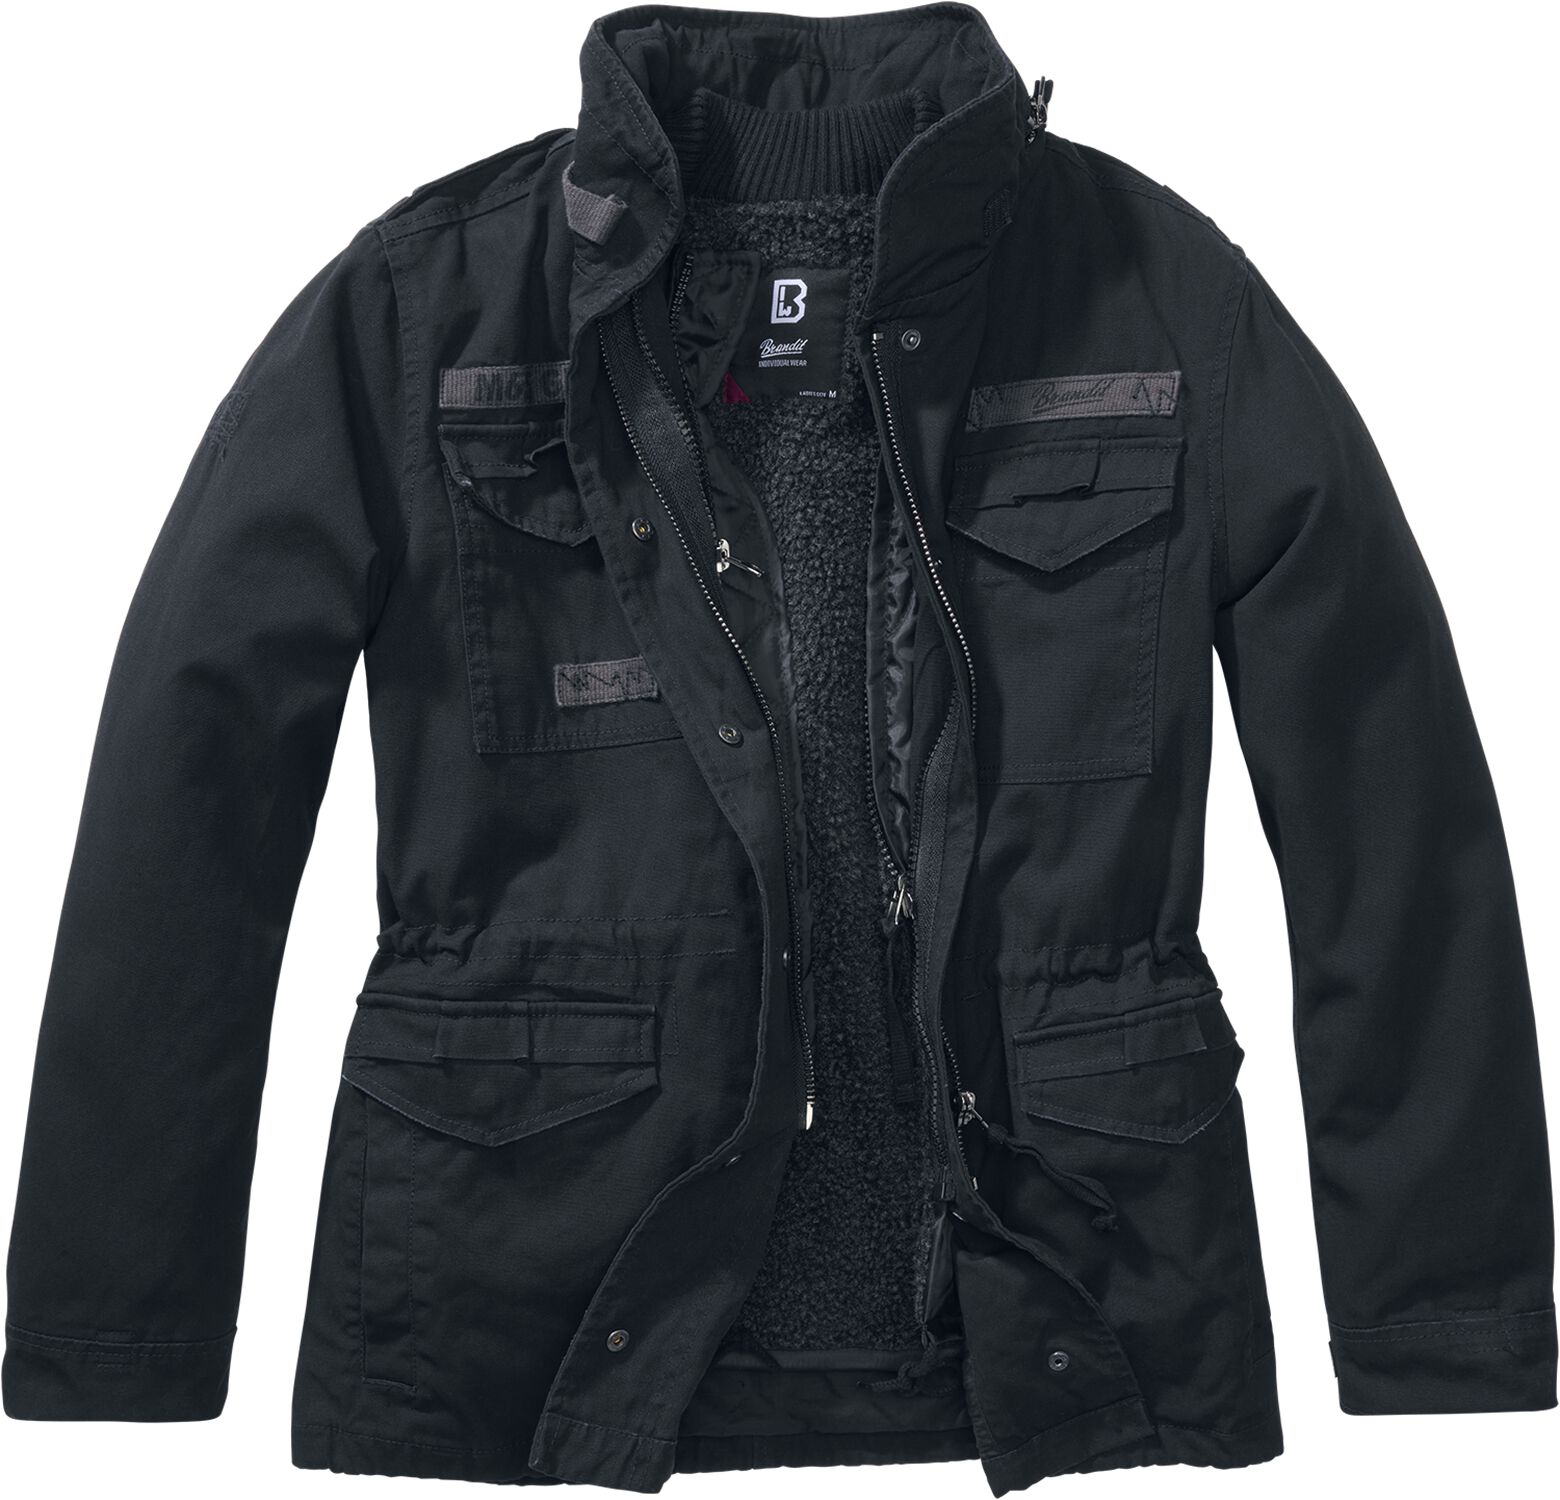 Image of Giacca invernale di Brandit - Ladies M65 Giant Jacket - XS a 5XL - Donna - nero